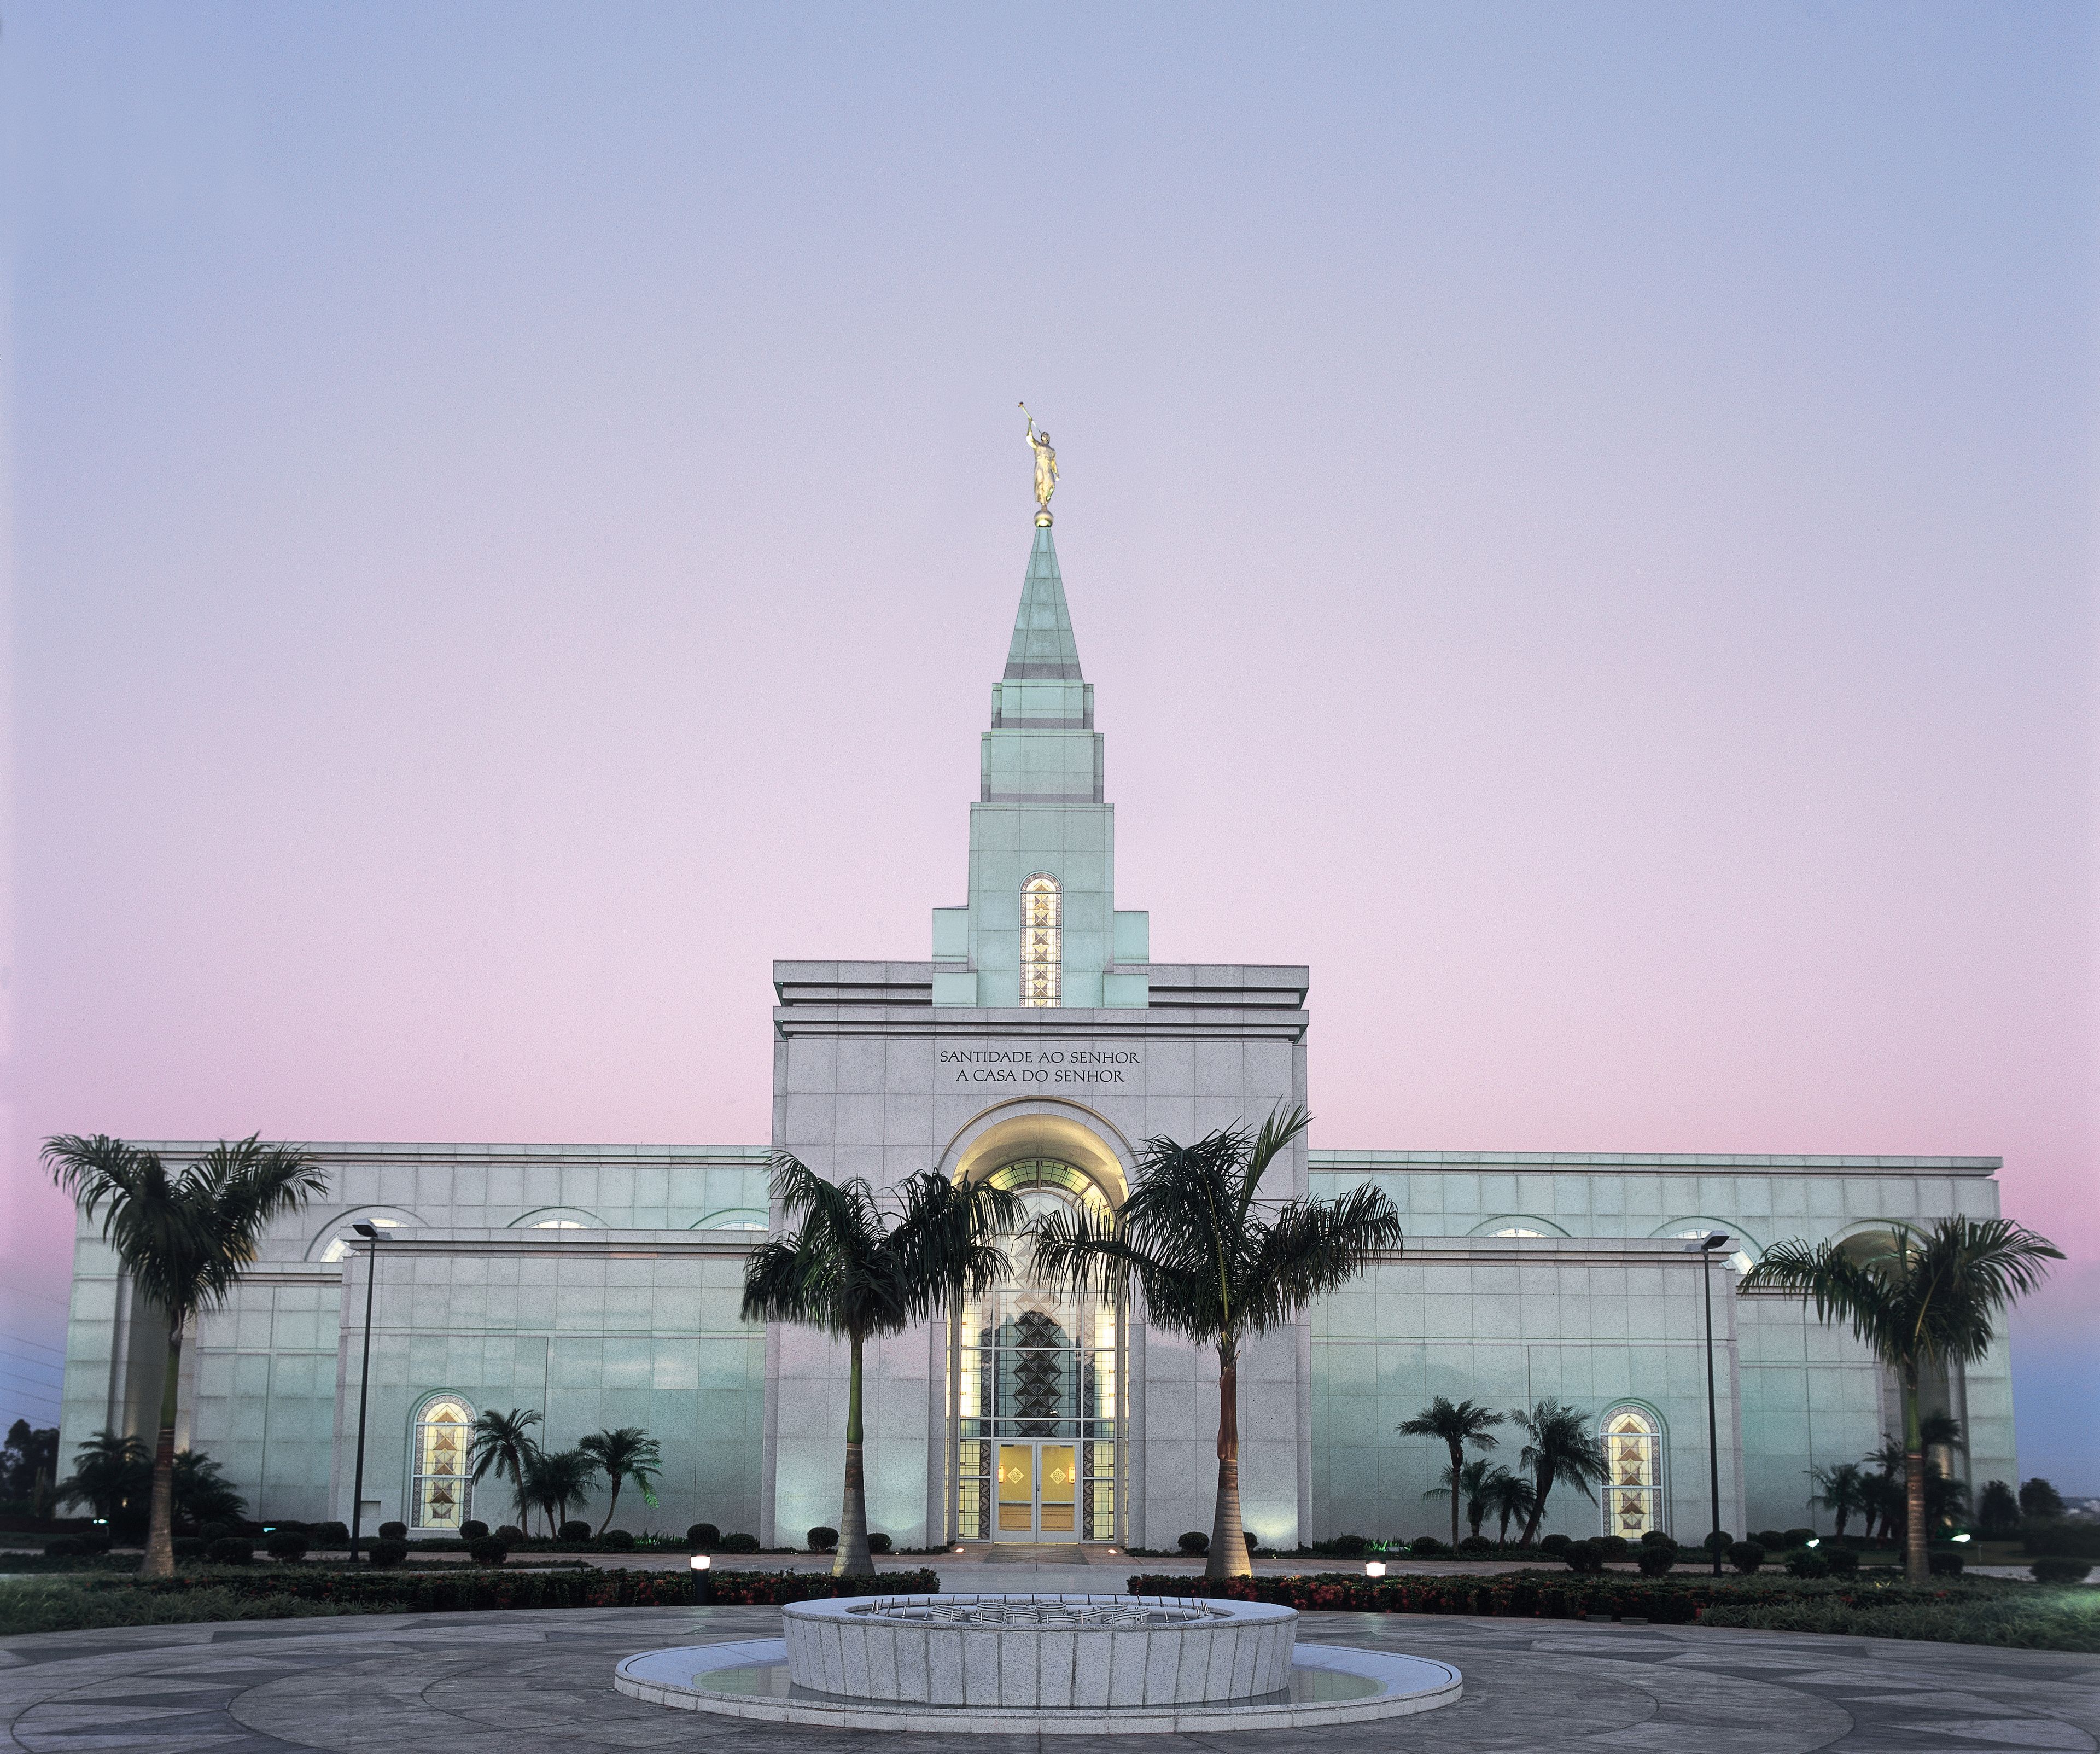 An exterior view of the Campinas Brazil Temple and its main entrance at dusk.